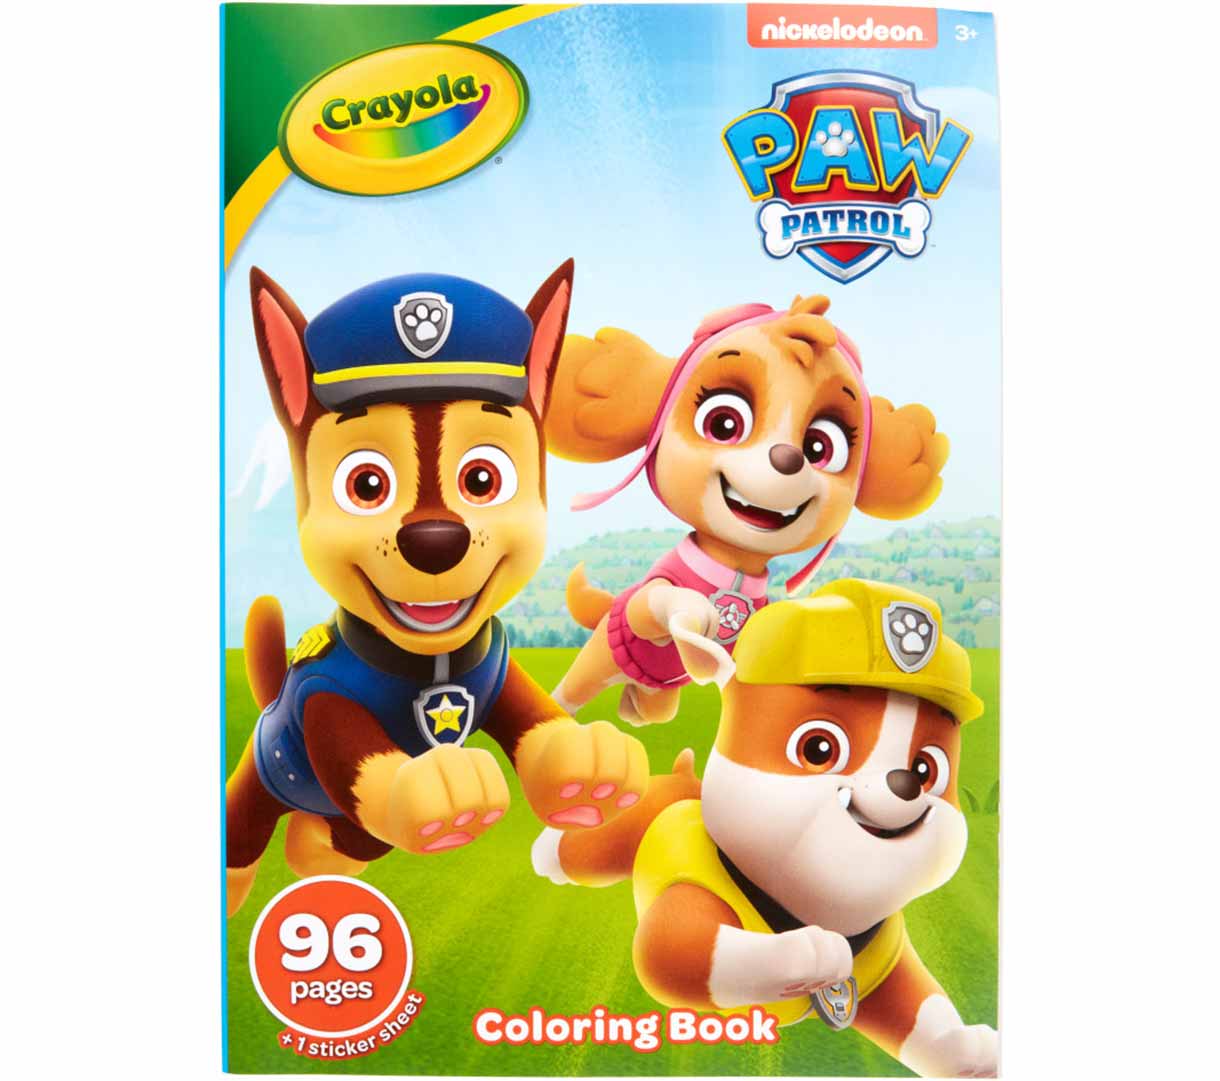 Paw Patrol Coloring Book with Stickers, 96 Pgs | Crayola